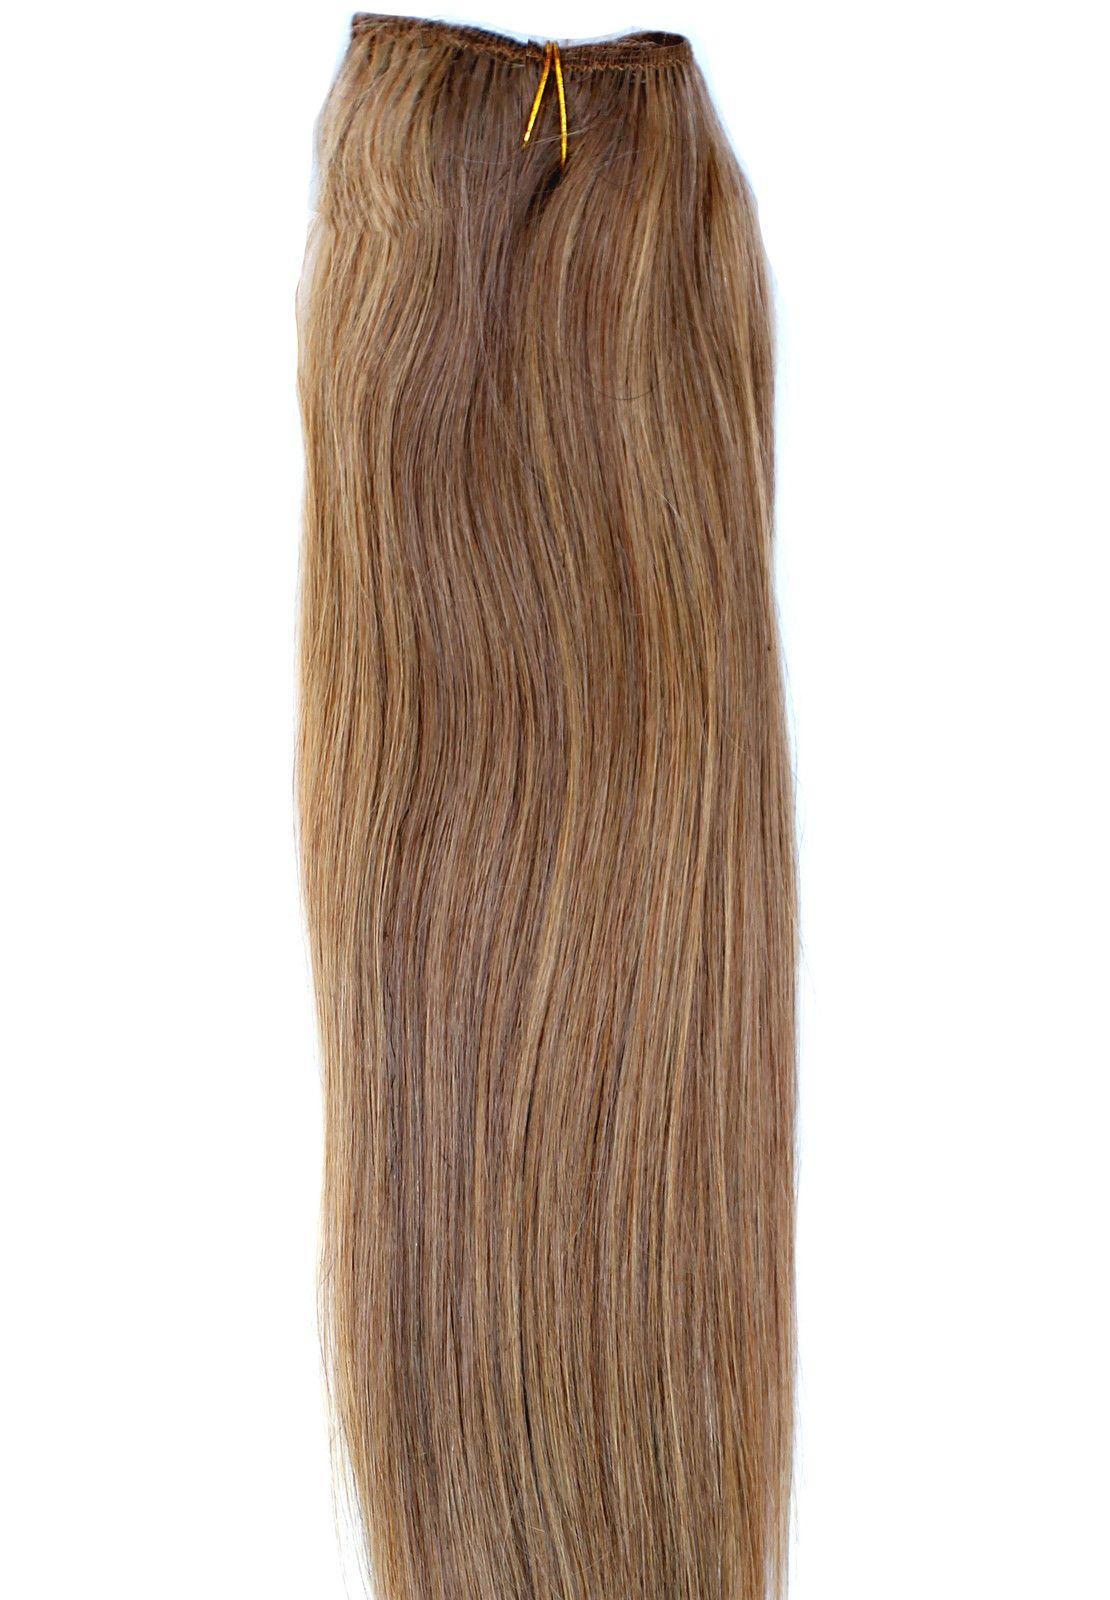 Weft Hair Extensions Caramel Brown (#10) | Forever Young